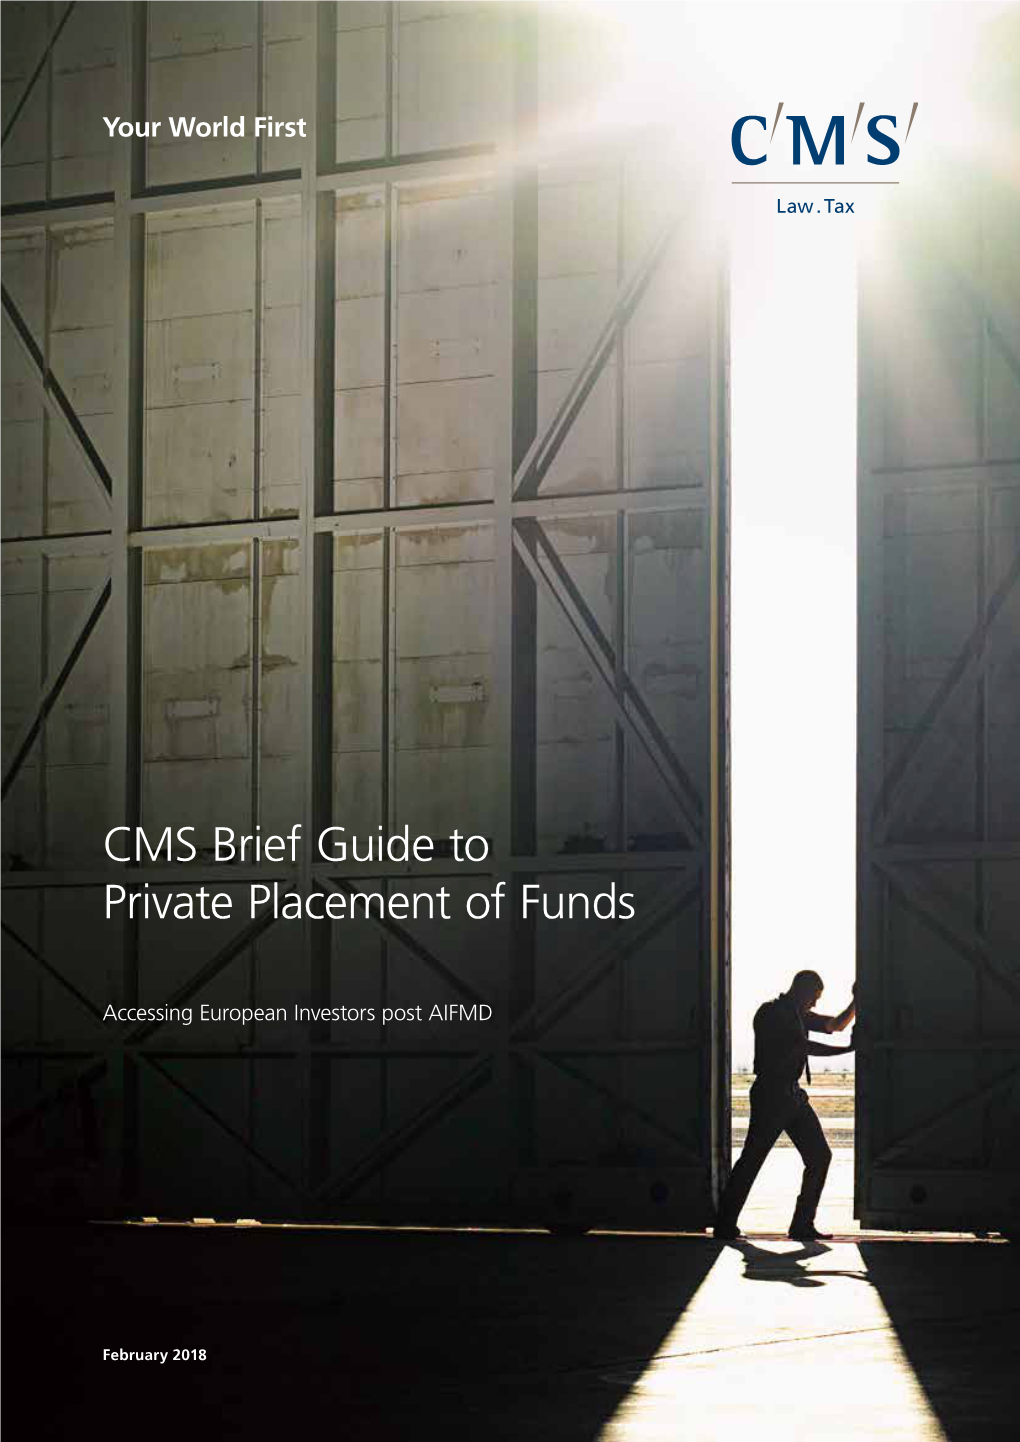 CMS Brief Guide to Private Placement of Funds